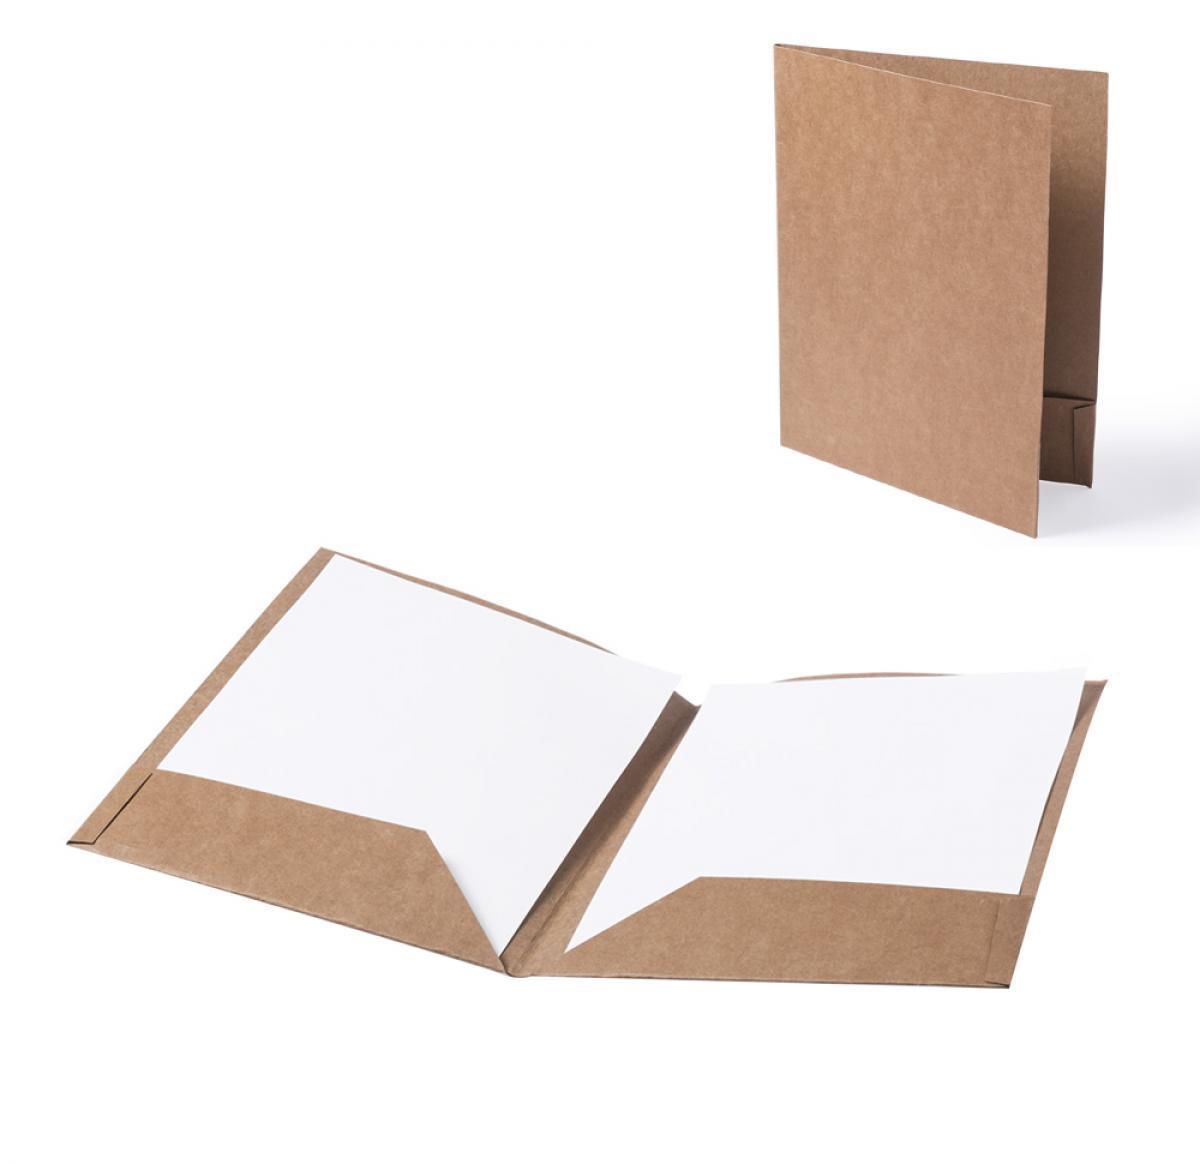 Recycled A4 Cardboard Folder Document File - Buy Promotional Products UK, Branded Merchandise, Corporate Gifts